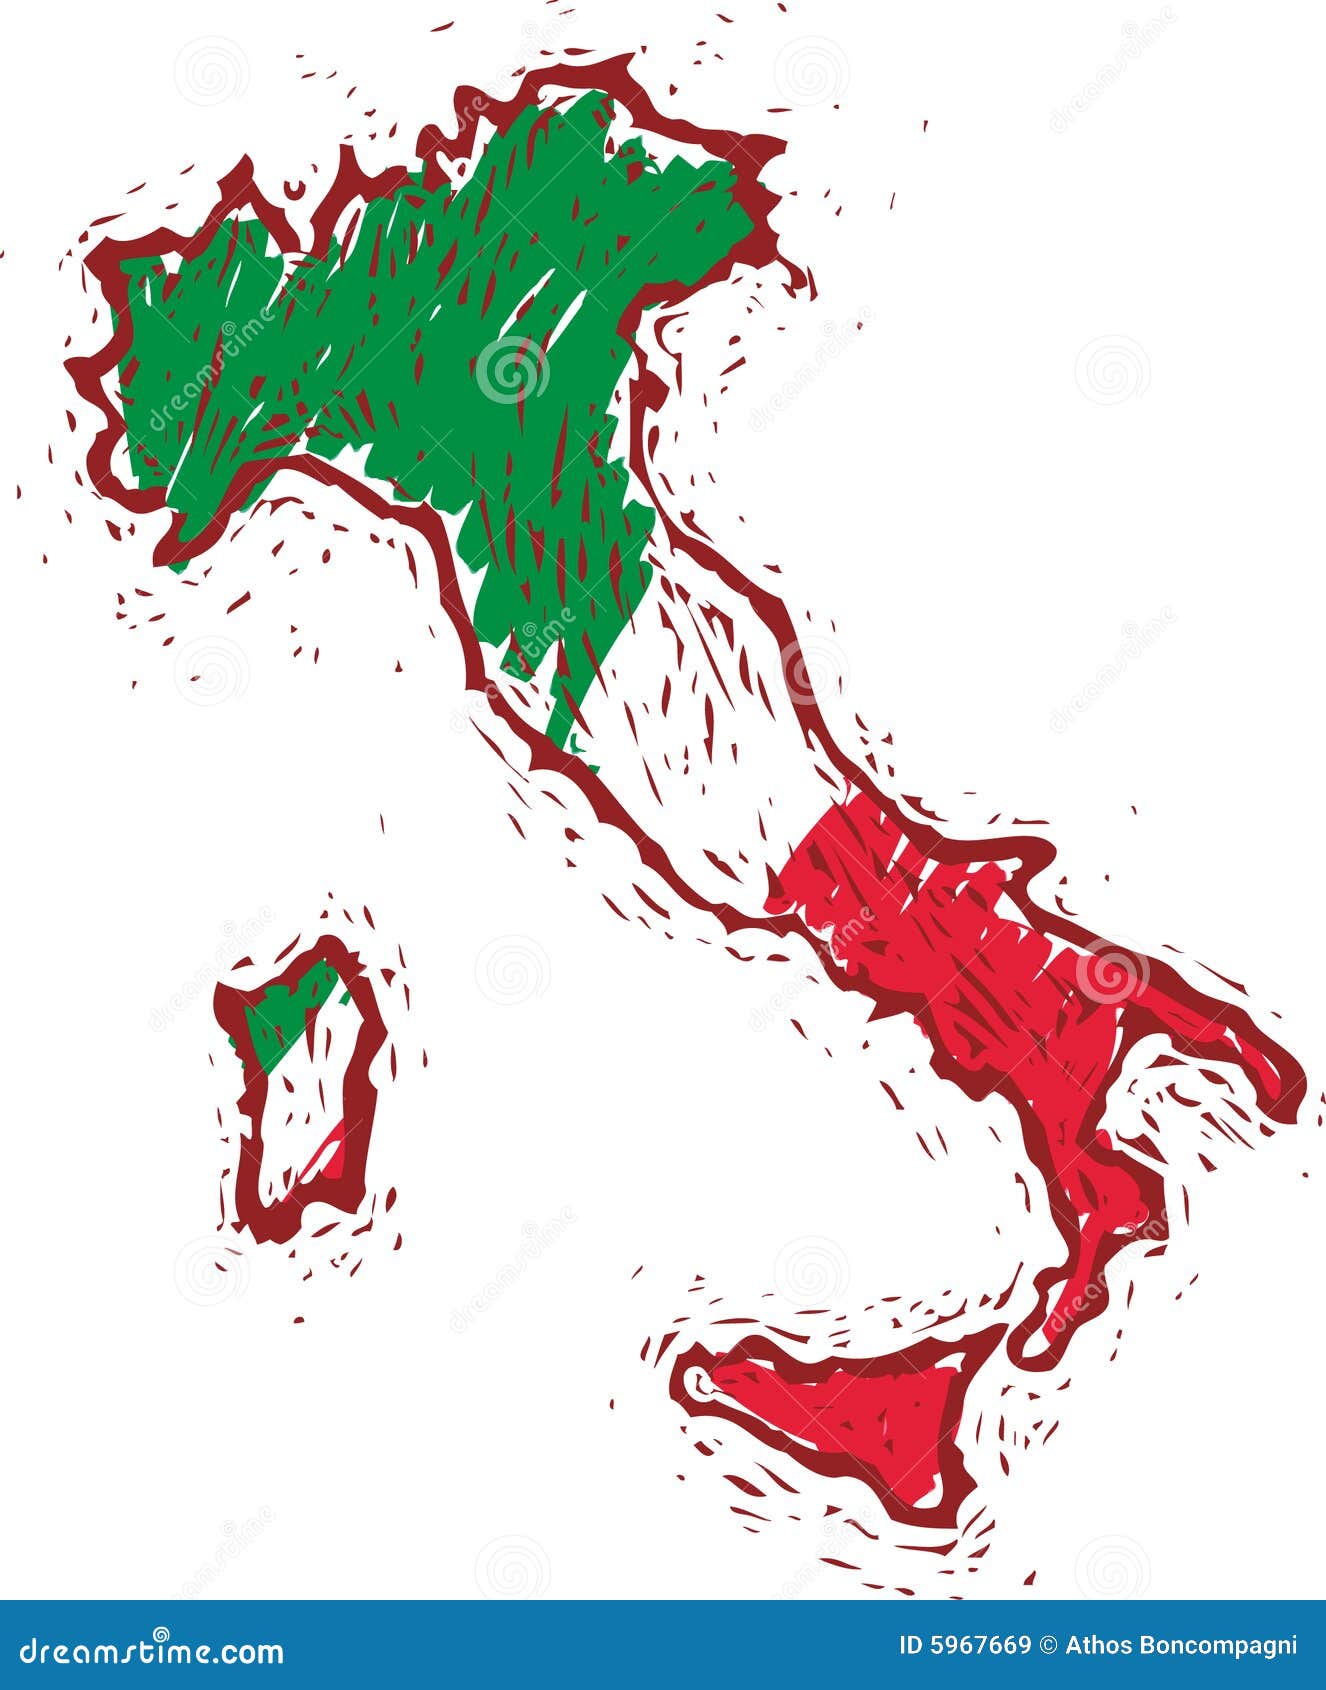 clipart map of italy - photo #15